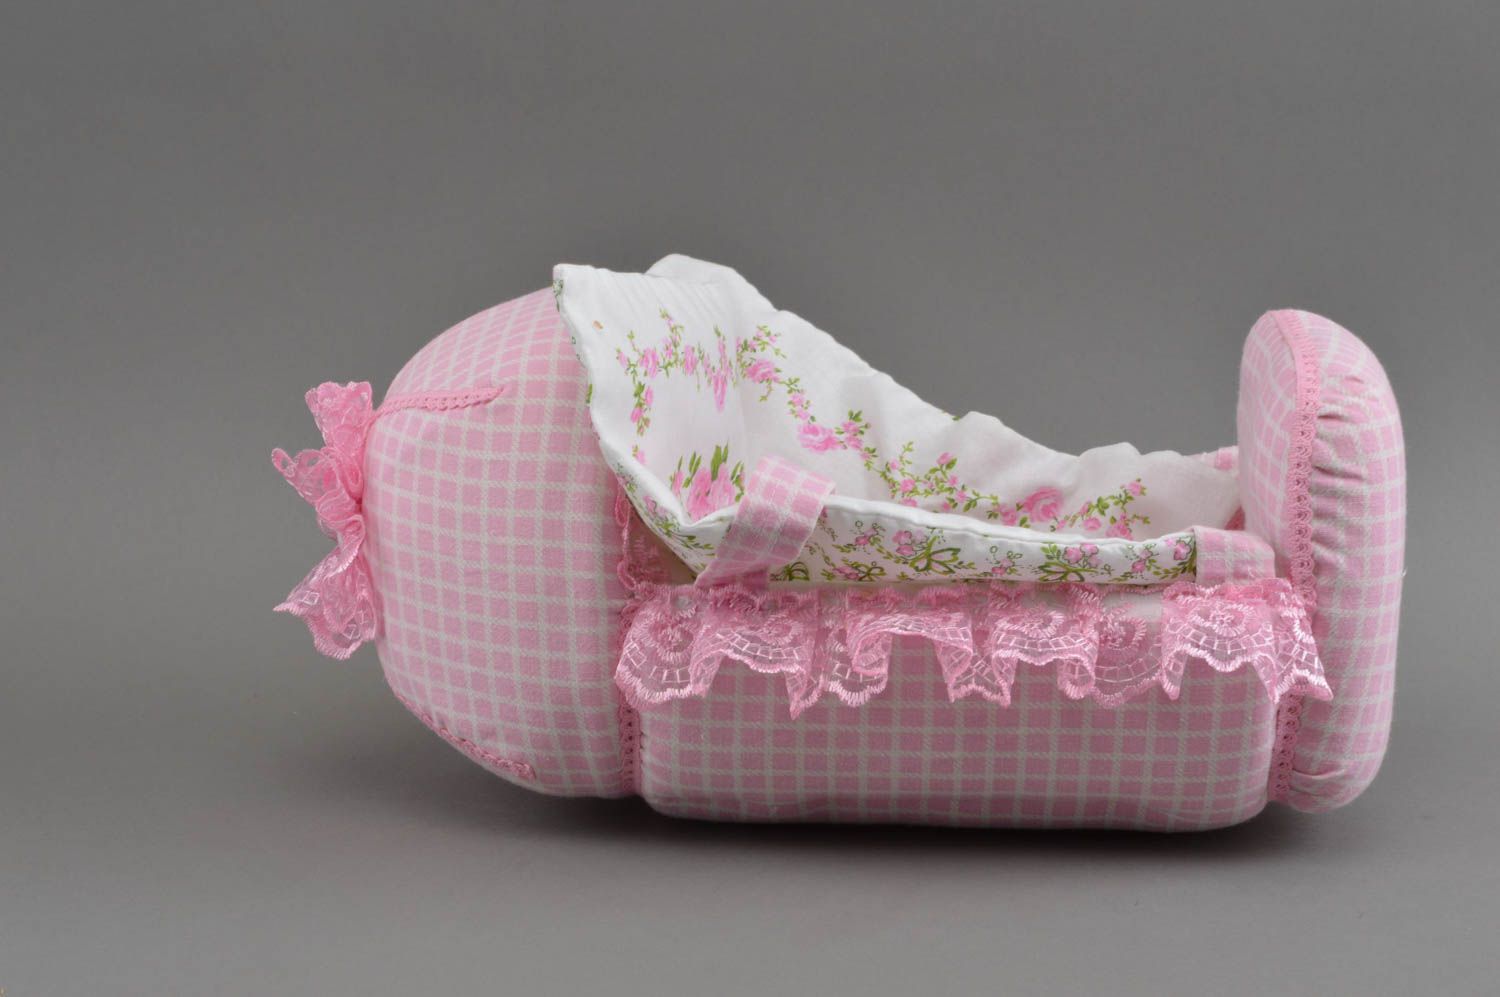 Cradle for doll soft cloth toy handmade stuffed toy bed doll furniture photo 3